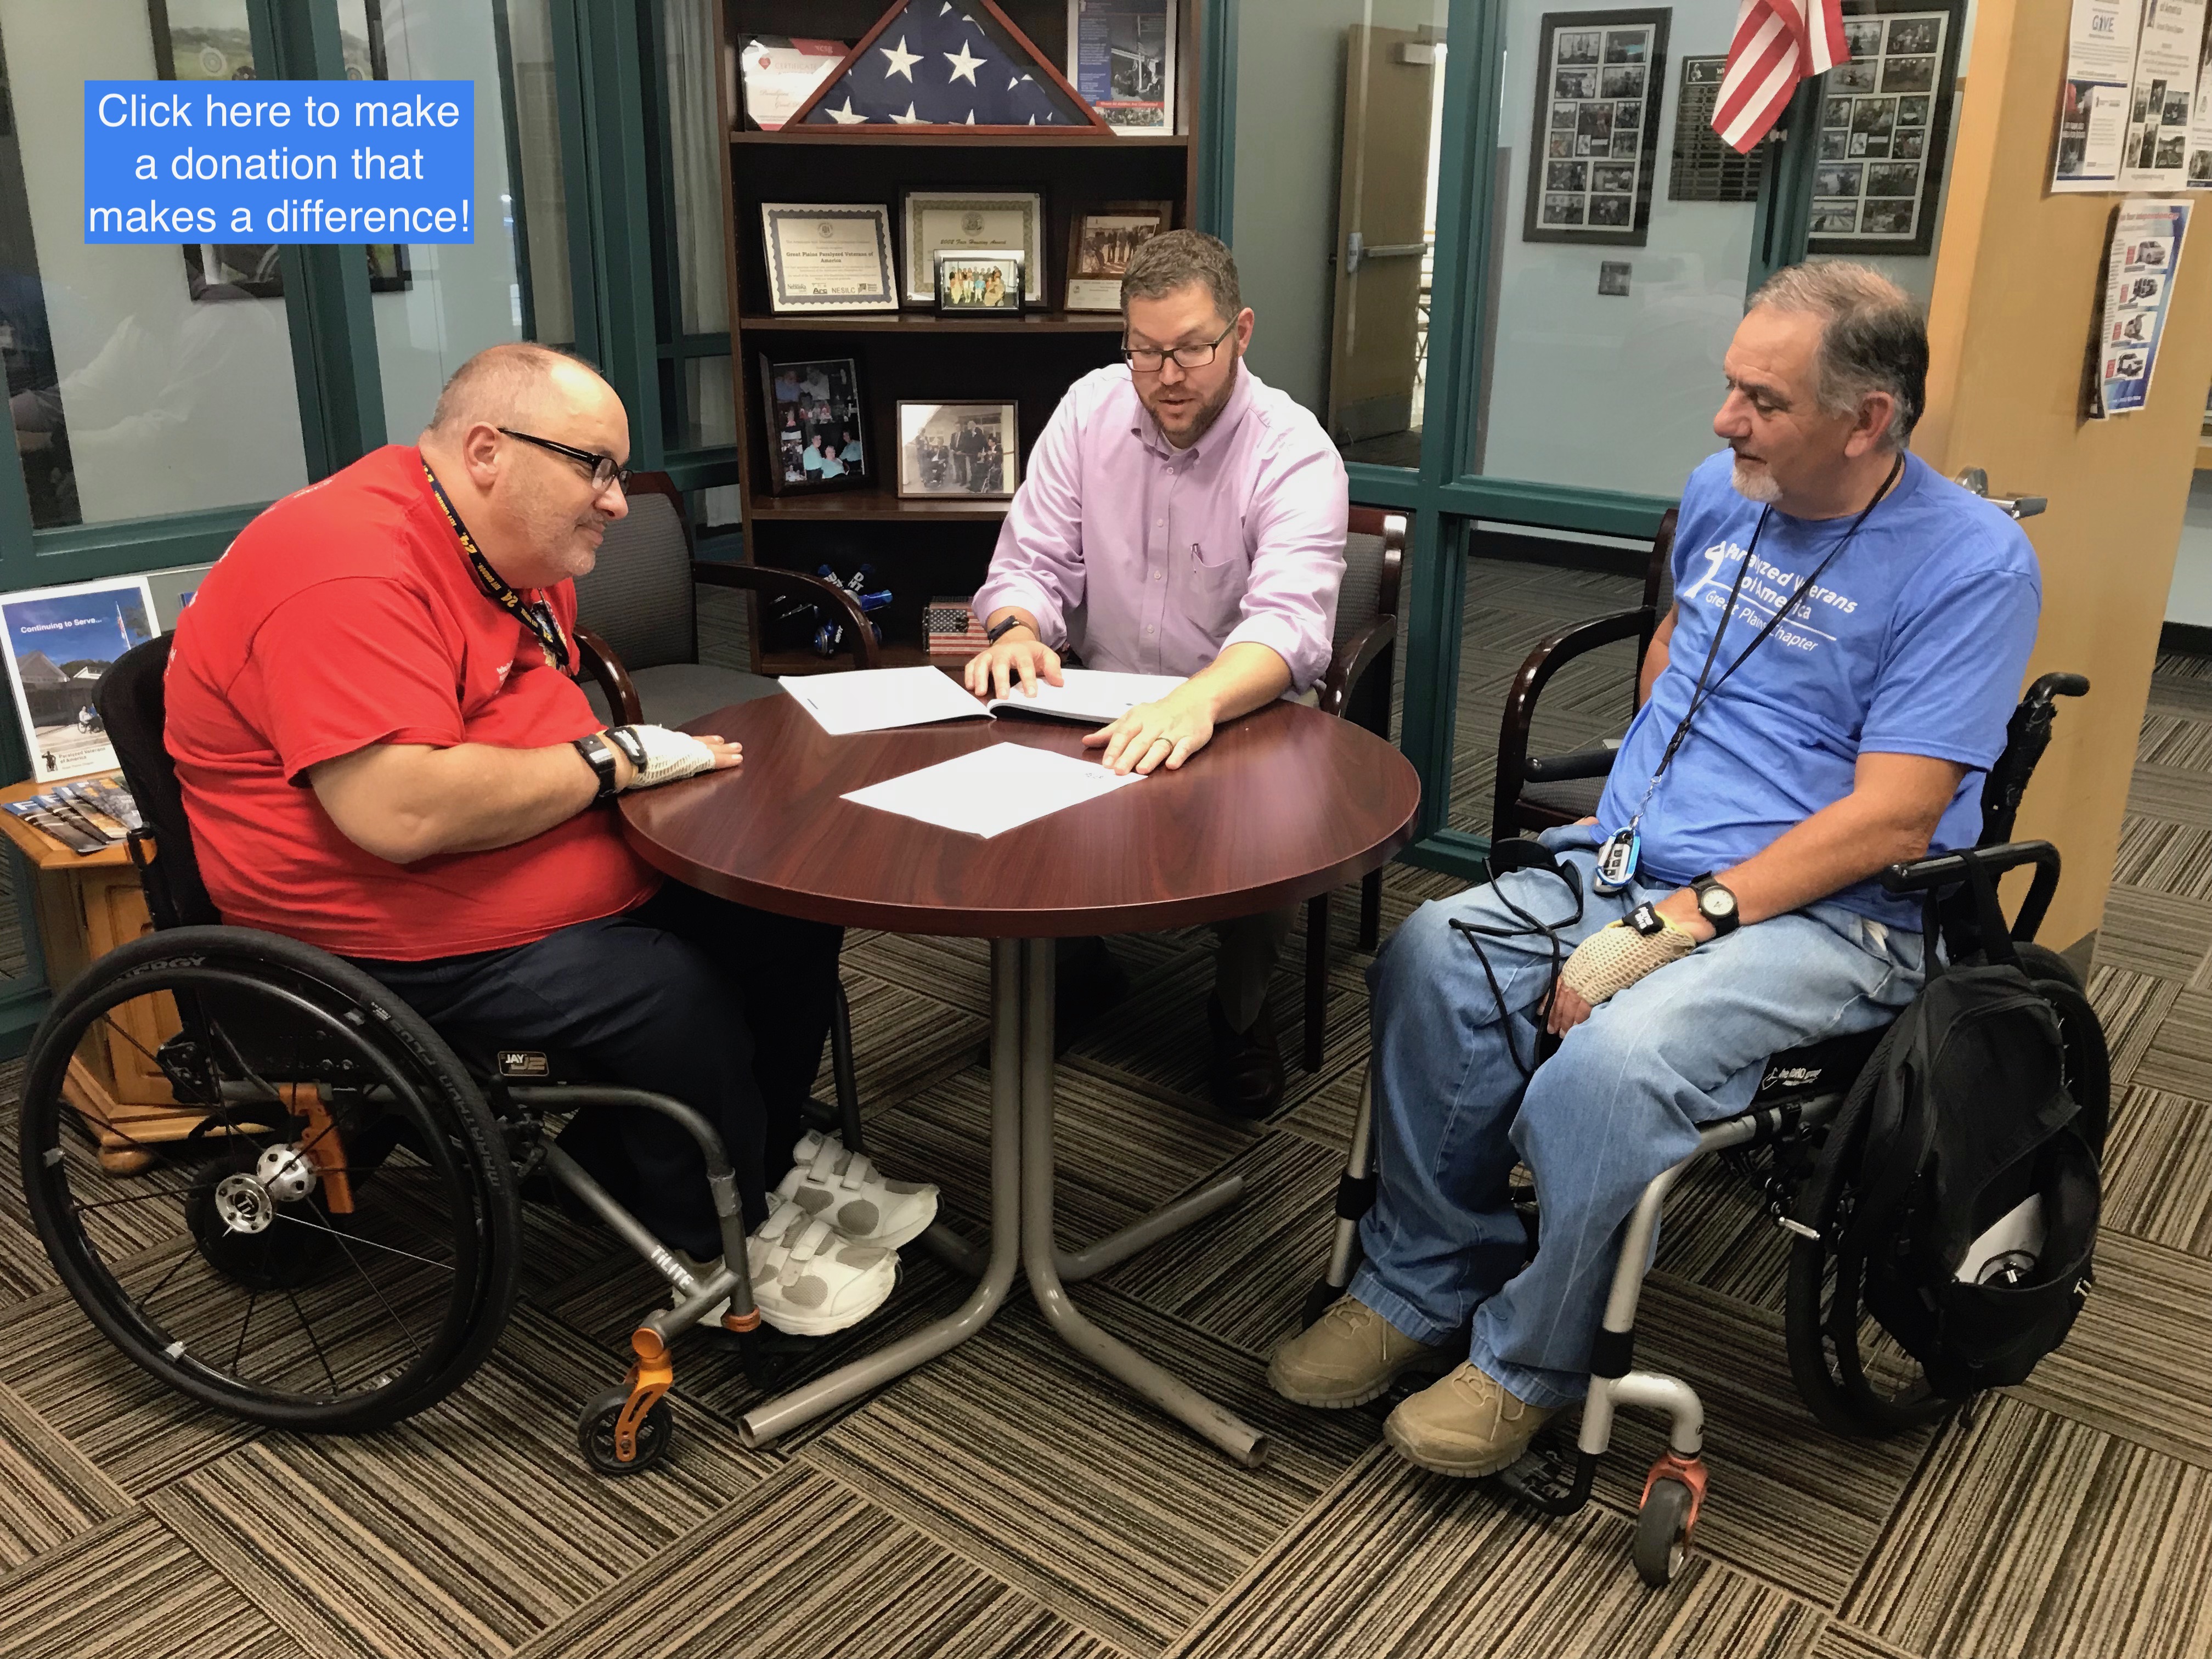 PVA’s National Service Officer assists veterans with their benefits and claims.